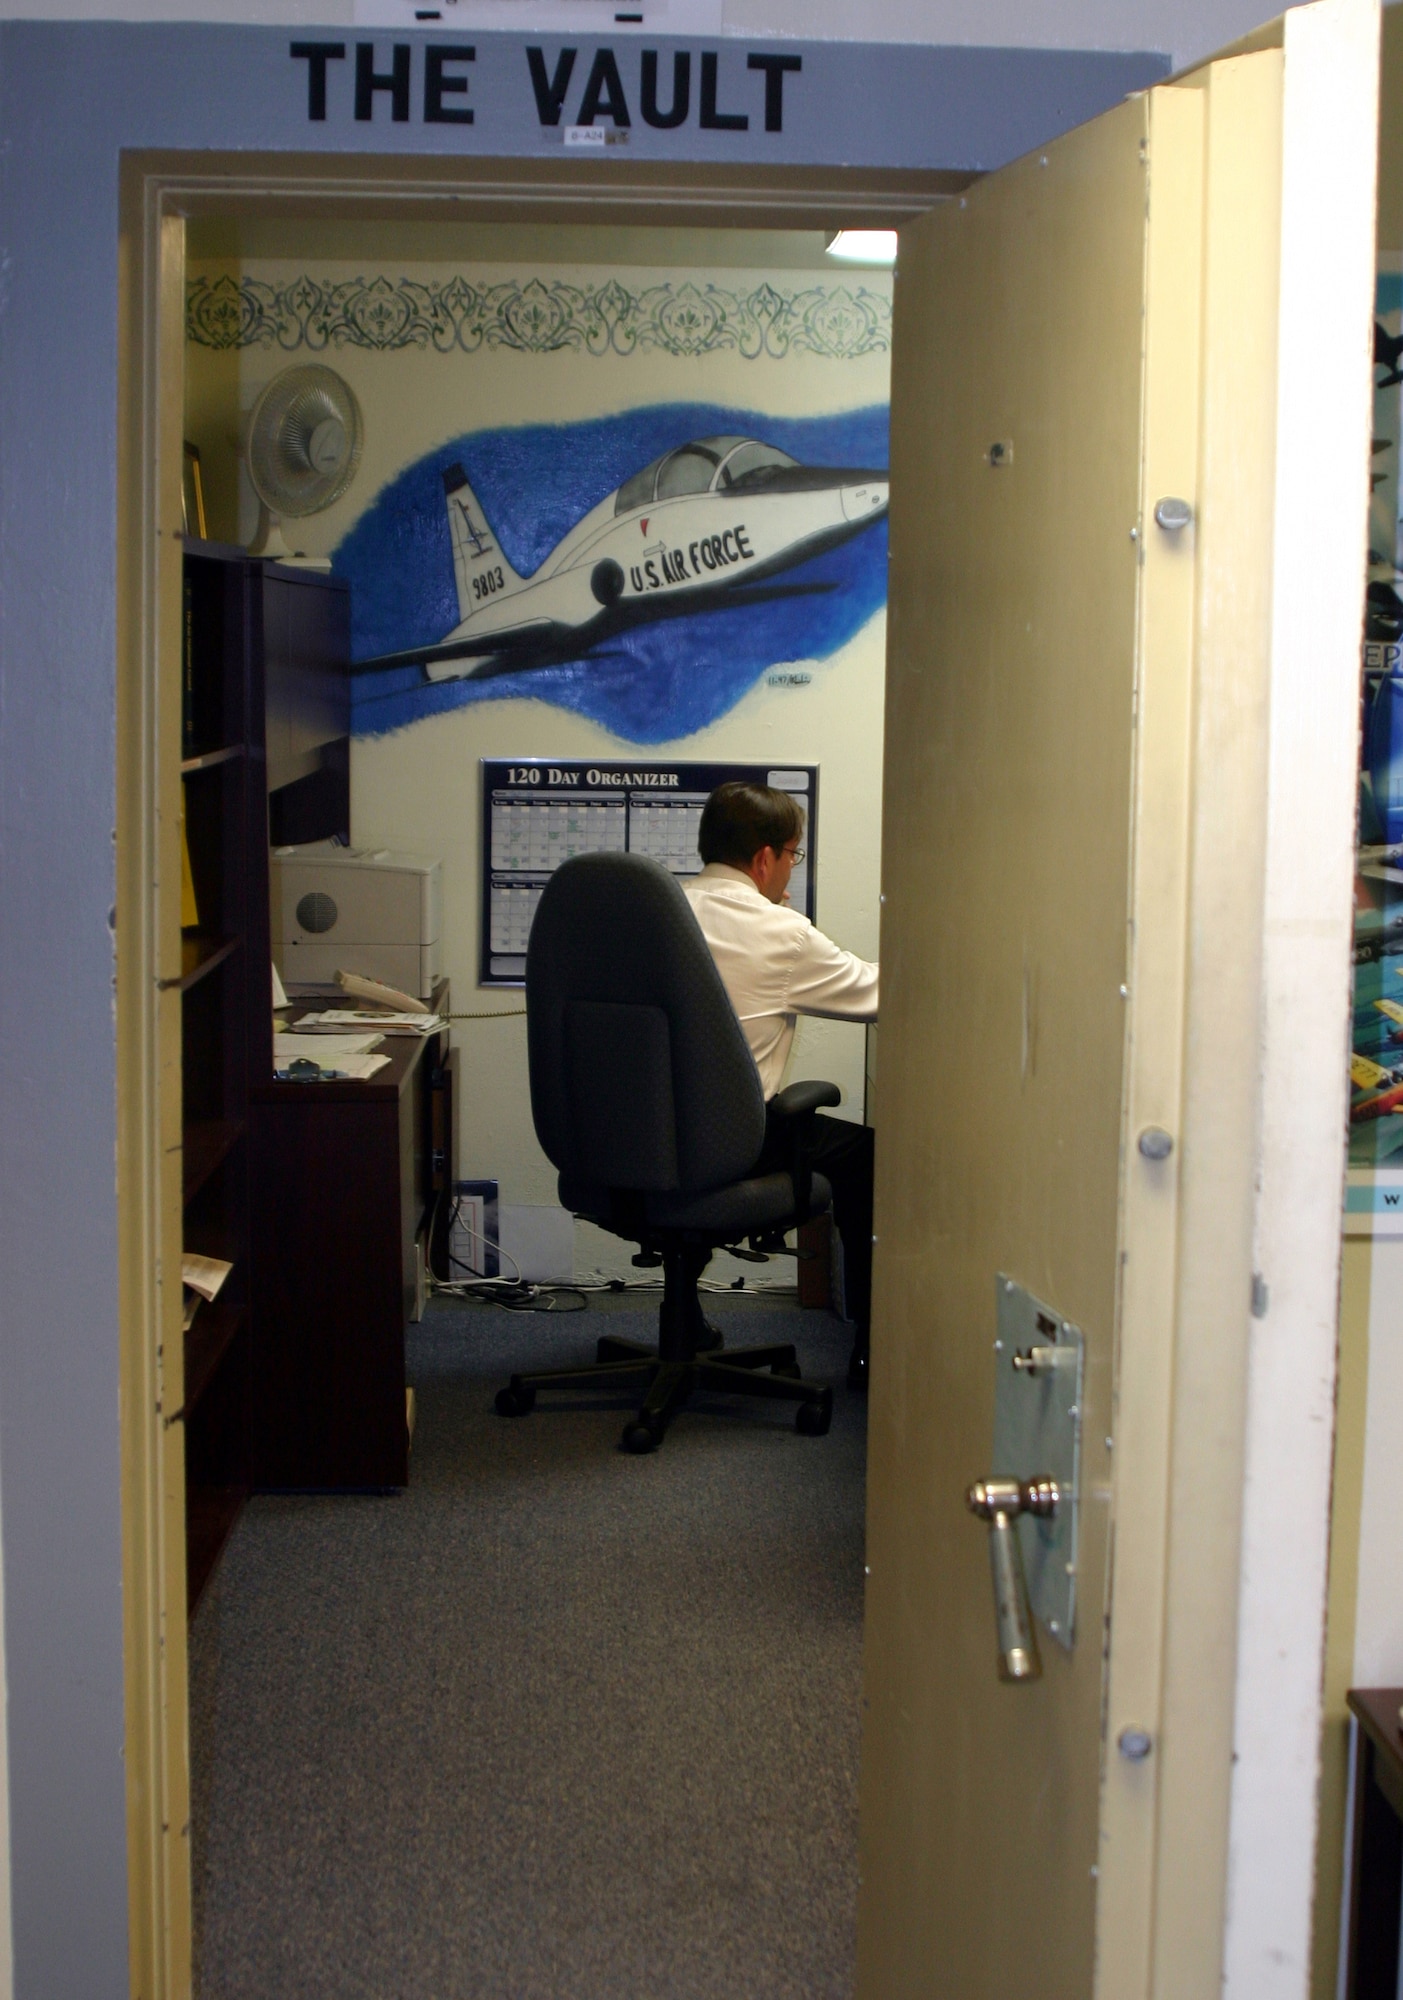 John Murphy, the 80th Flying Training Wing's new historian, works in his office that is known as the vault. (U.S. Air Force photo/Airman Jacob Corbin)